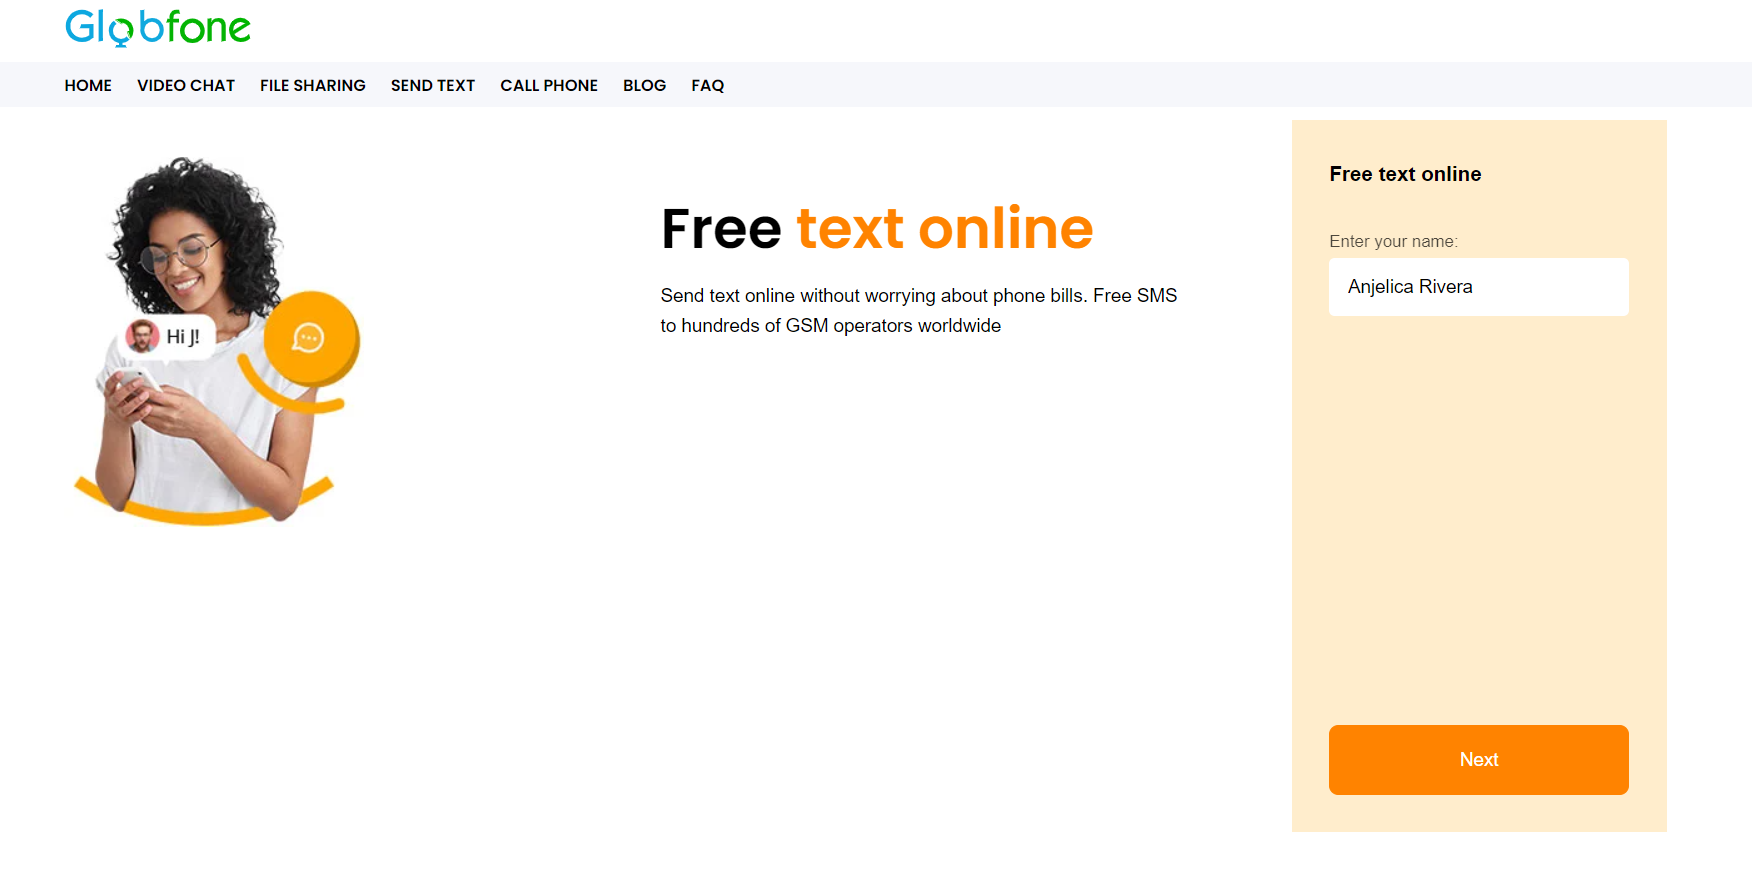 Globfone is a comfortable website for text messaging spoofing